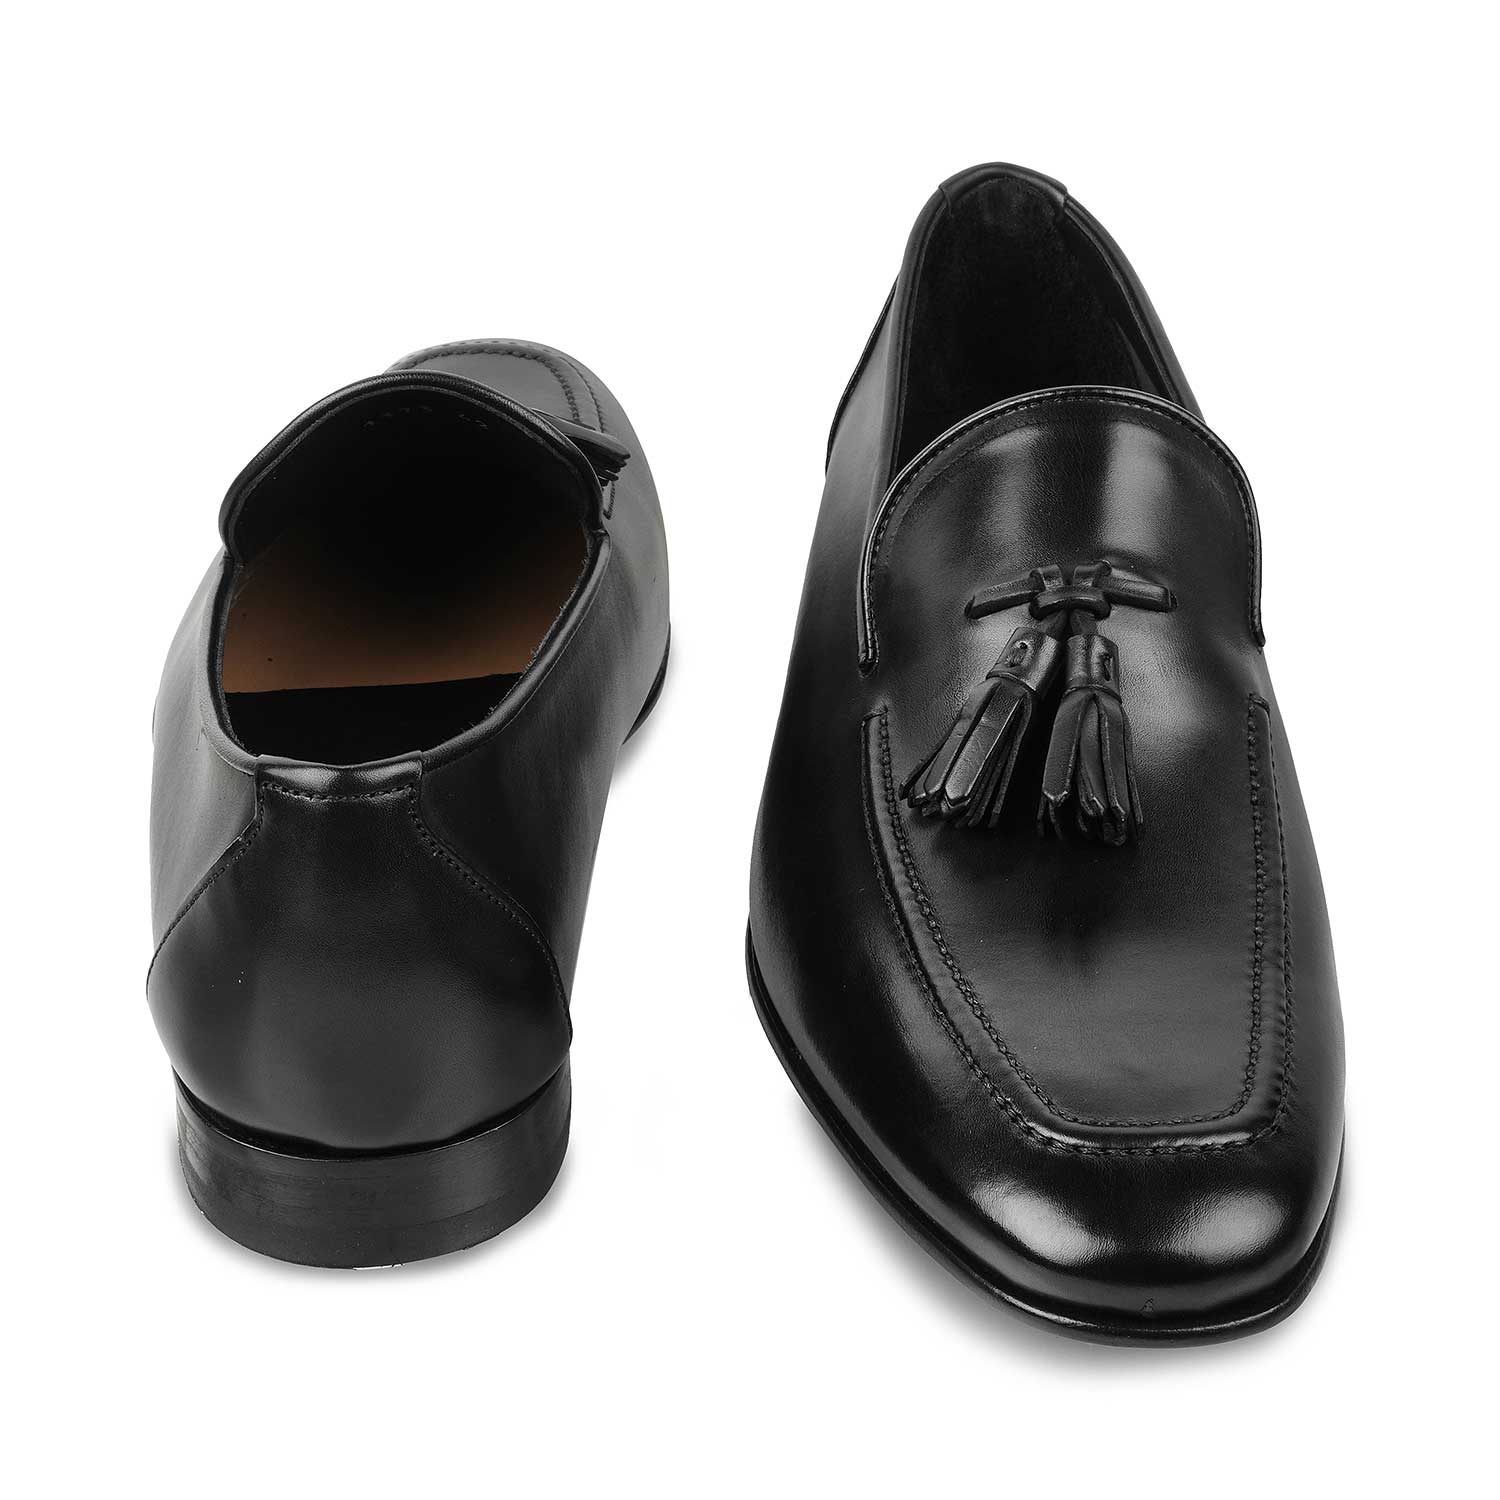 The Maffeo Black Men's Handcrafted Leather Loafers Tresmode